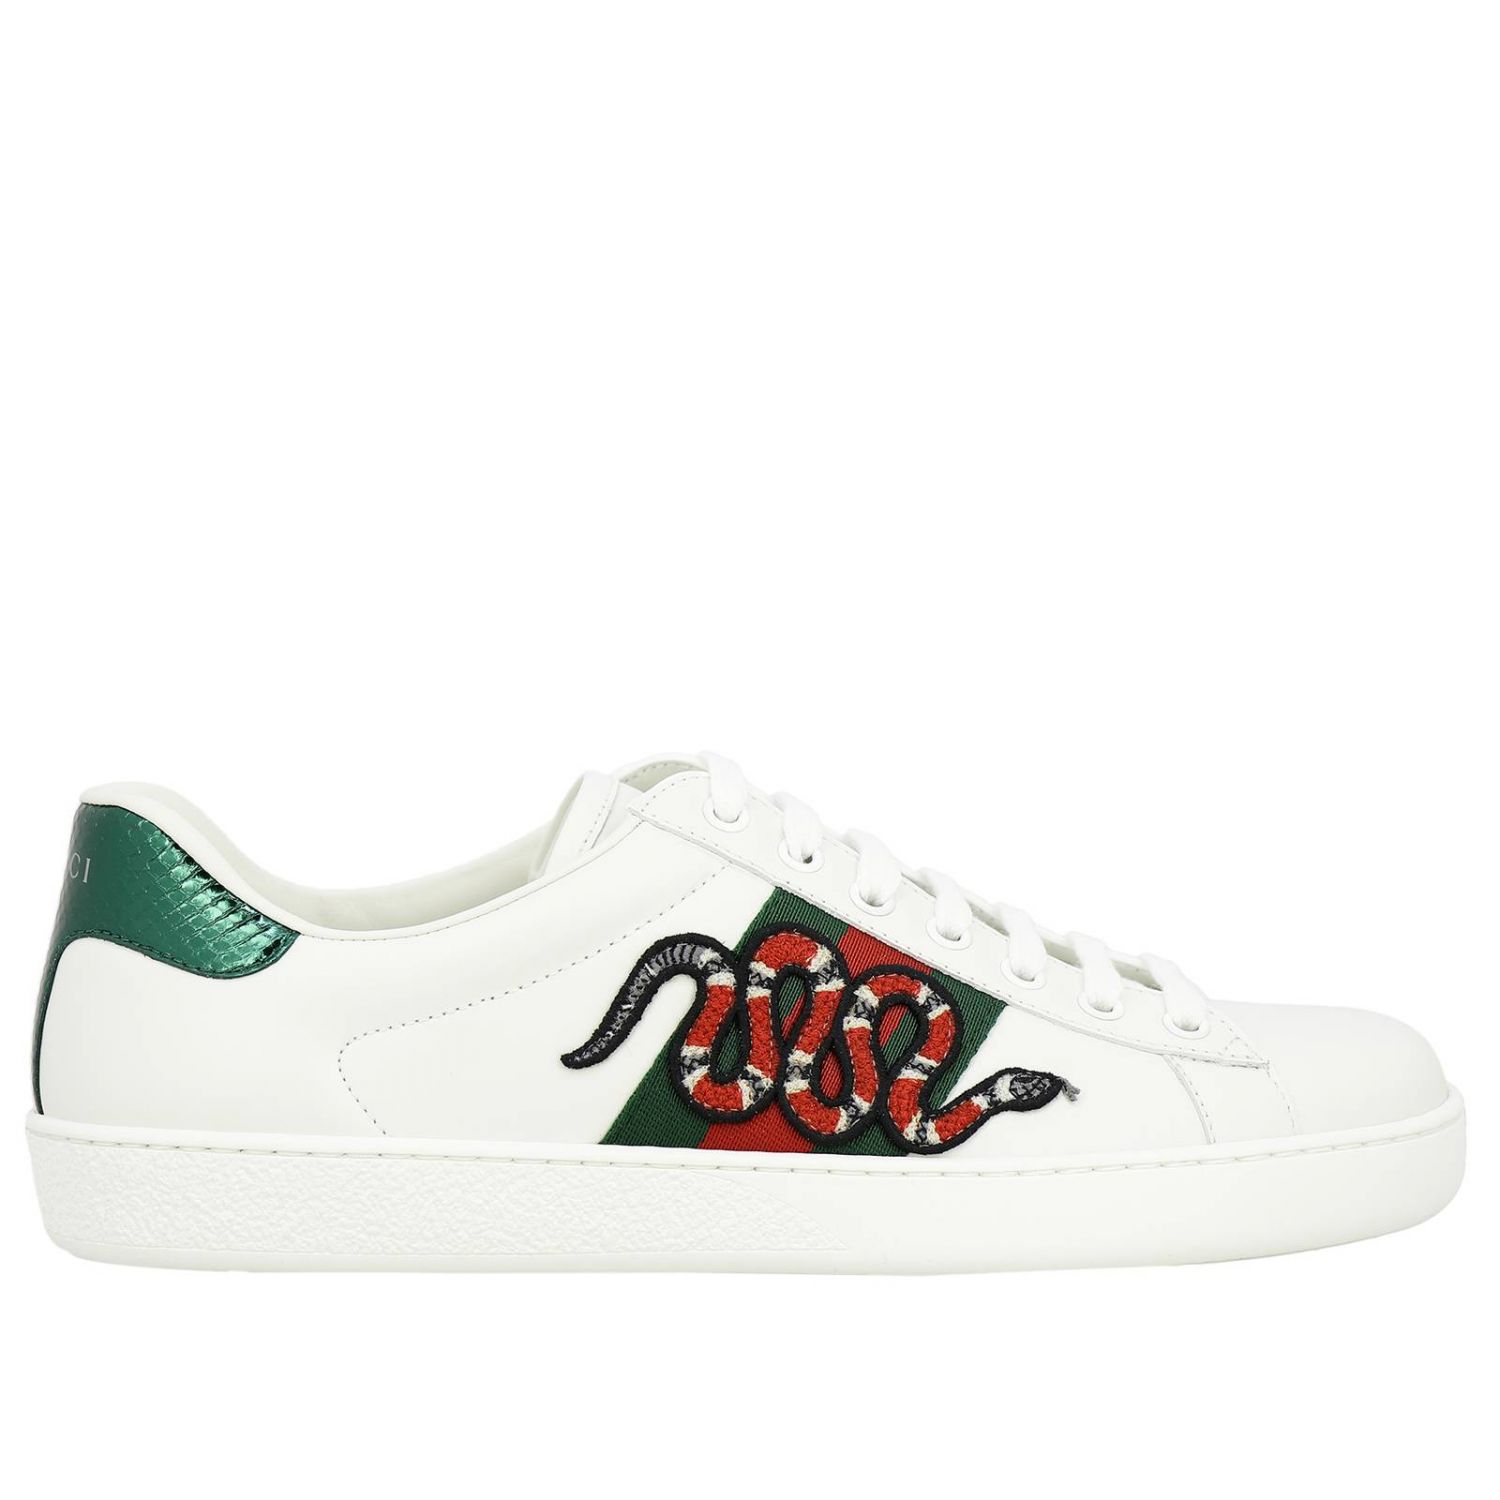 gucci men's new ace leather lace up sneakers